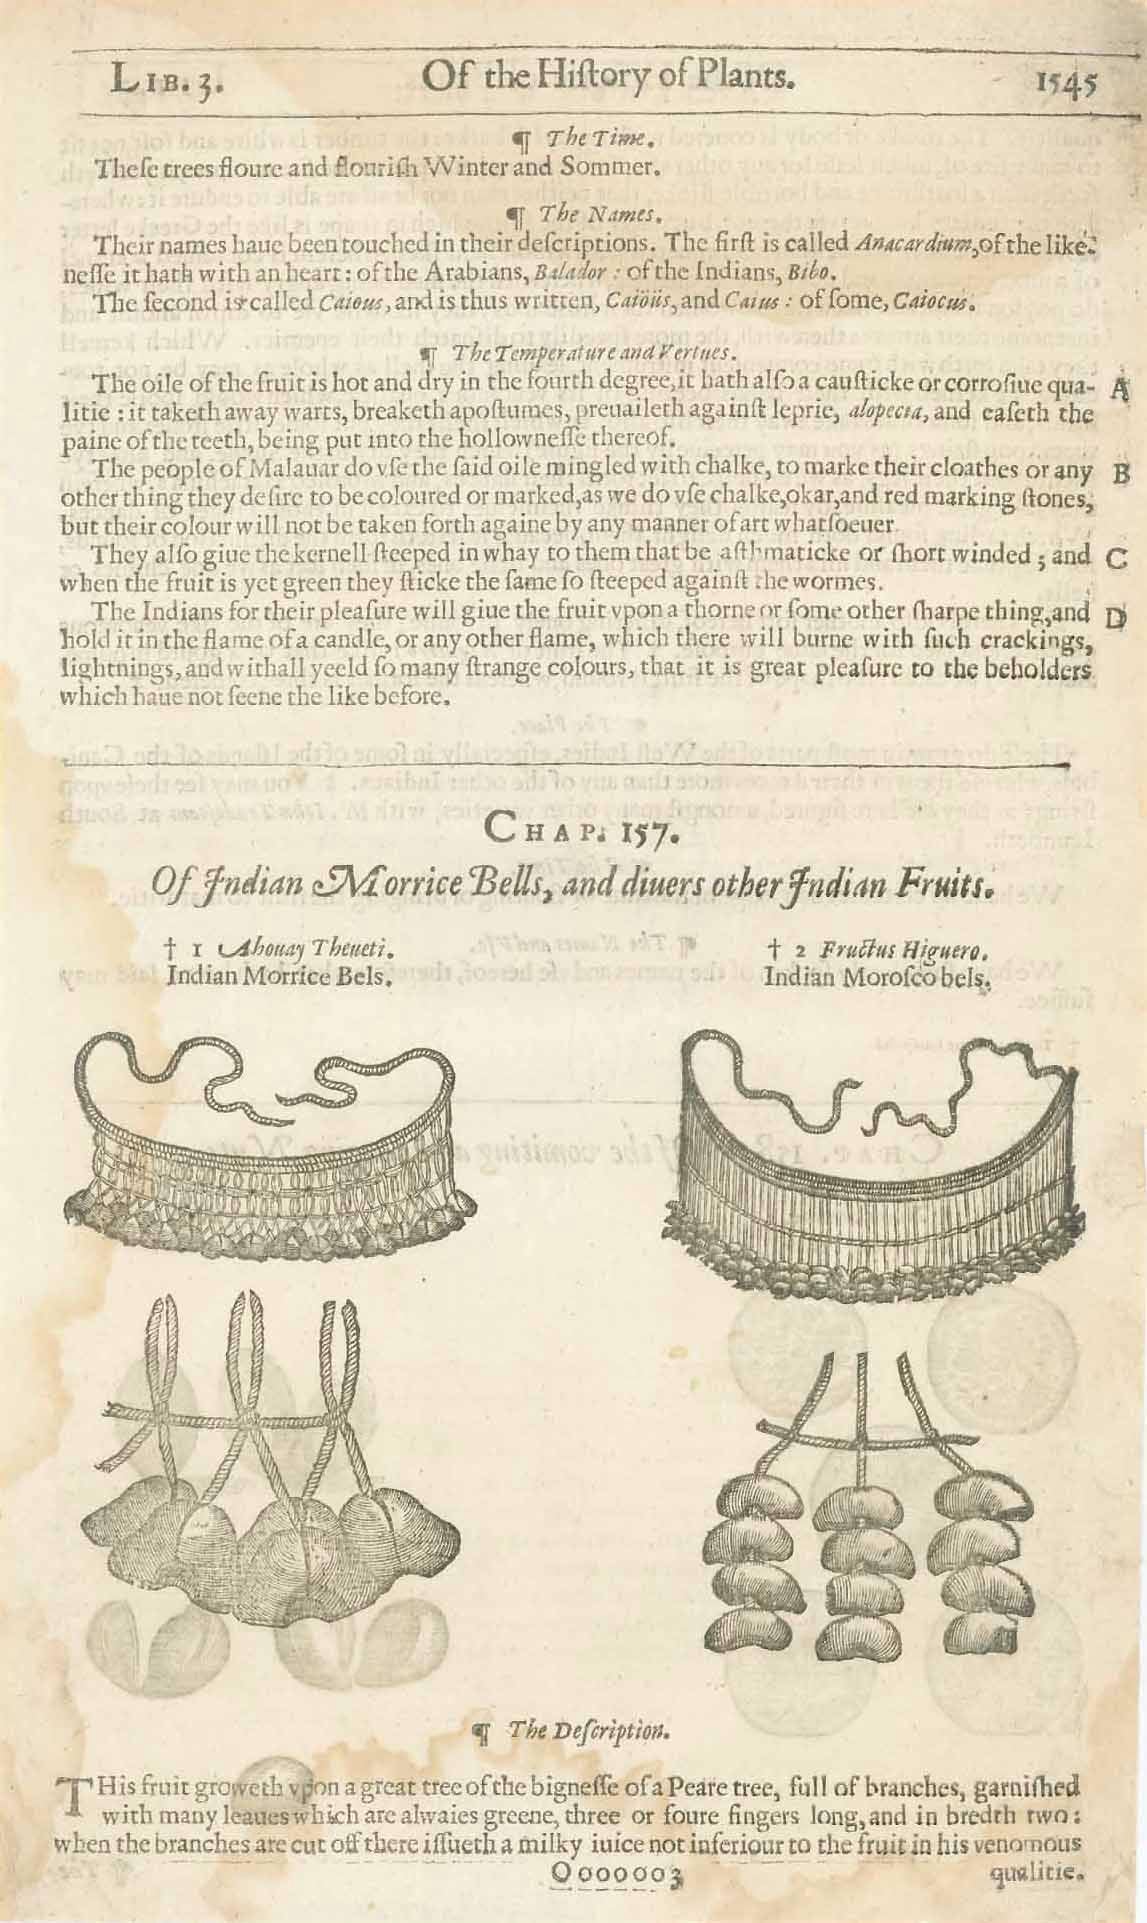 "Of Indian Morrice Bells, and divers other Indian Fruits"  "Ahovay Theveti" and "Fructus Higuero"  Fruits of plants which, dried, rattle. These were used by people in India for Morris Bells tied around the legs of Morris Dancers  Woodcuts.  Published in "Gerard's Herbal - History of Plants" by John Gerard (1545-1612)  London, 1597